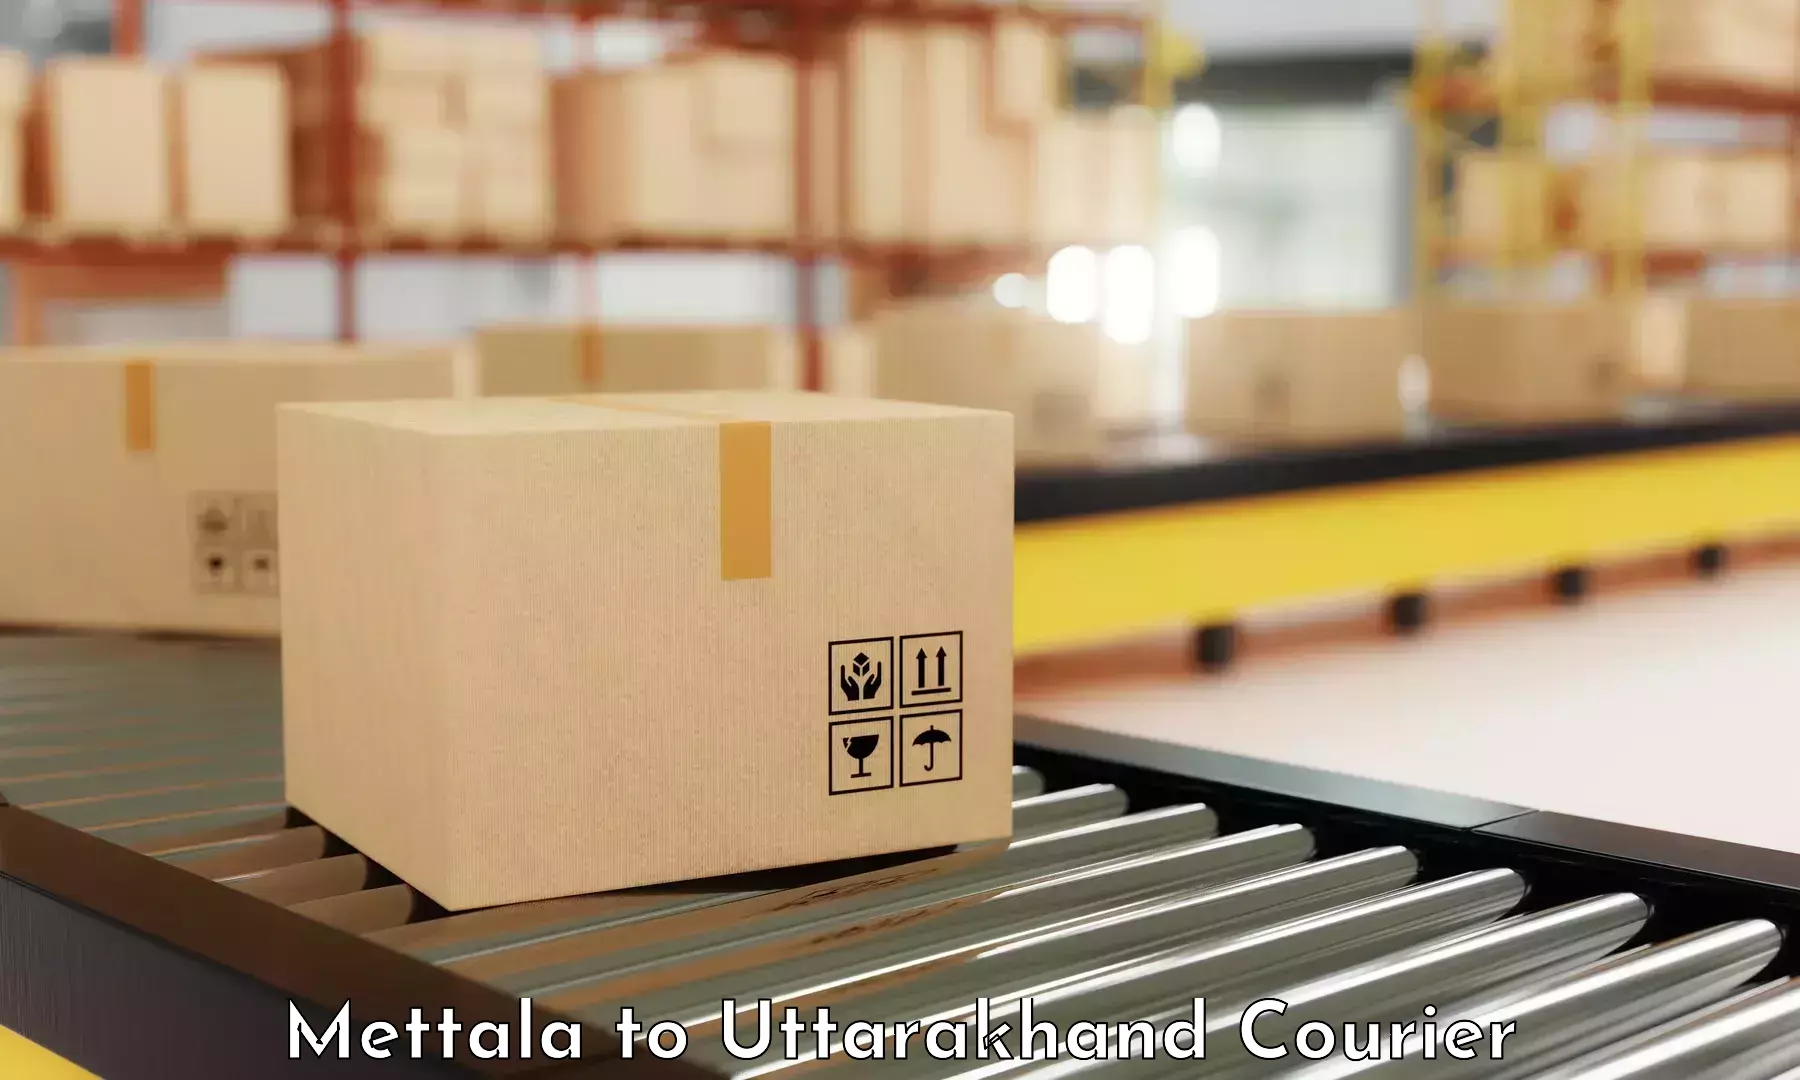 Multi-national courier services Mettala to Khatima